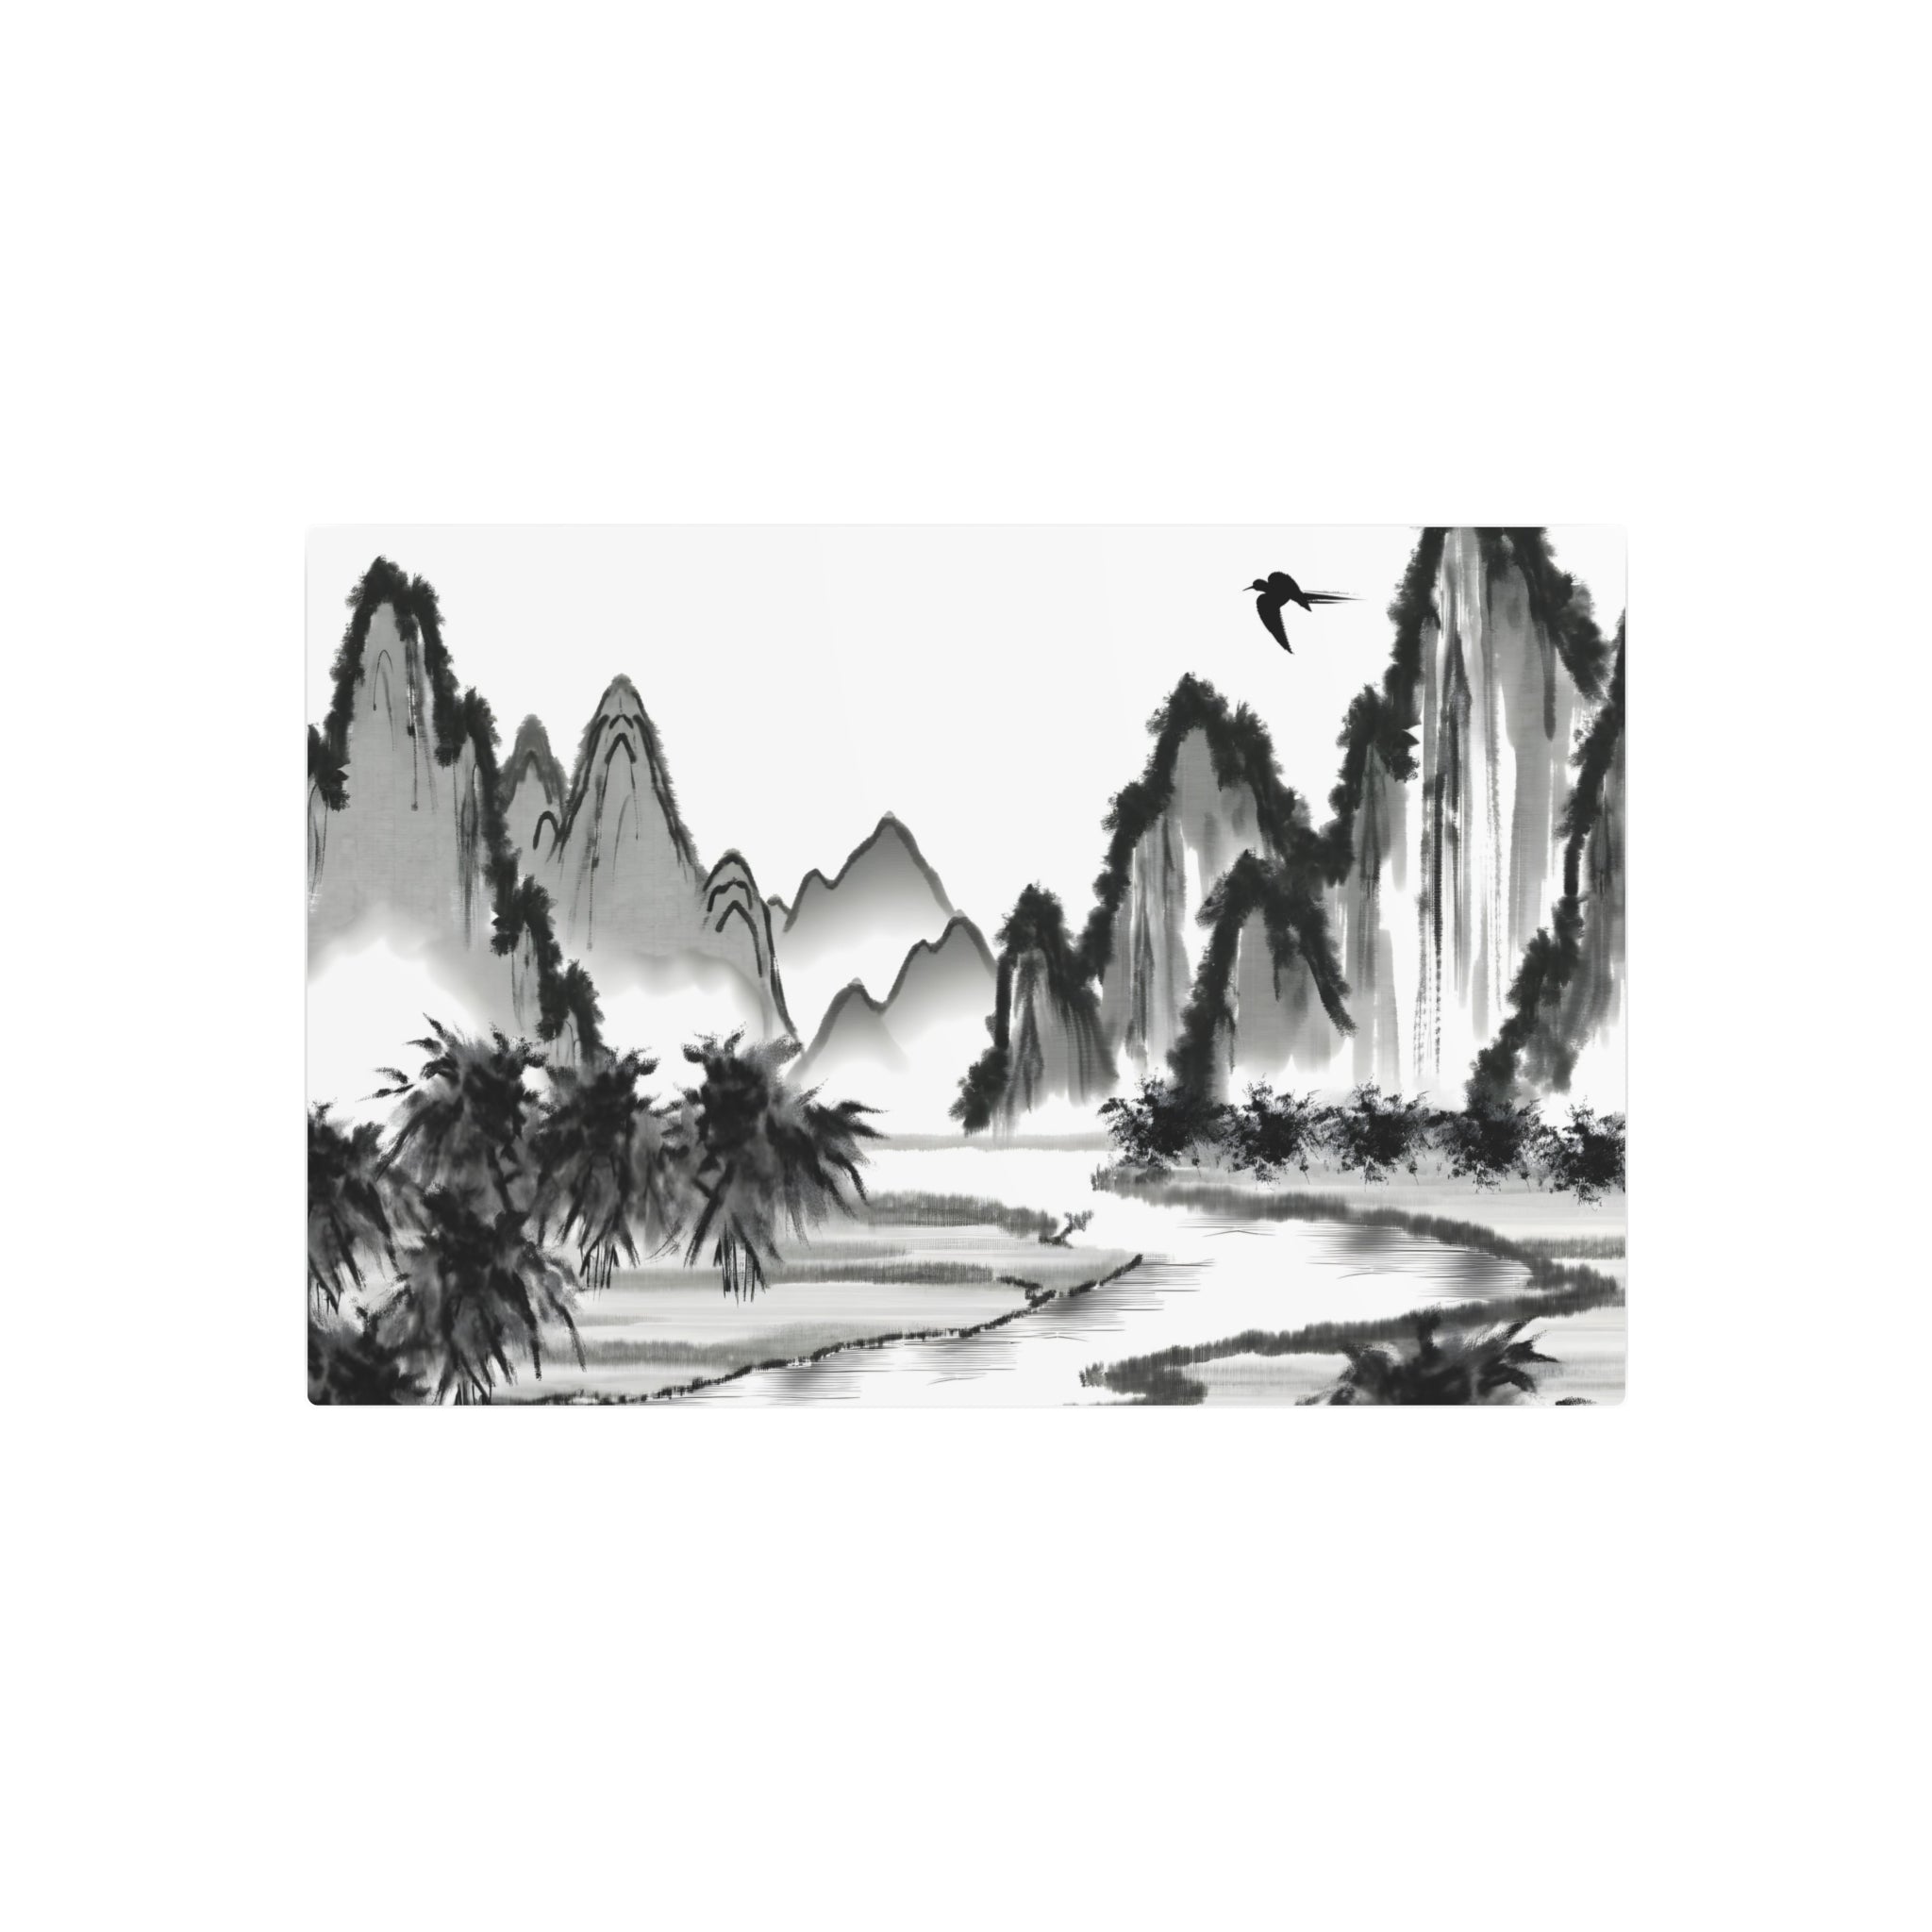 Metal Poster Art | "Traditional Chinese Landscape Art - Serene Countryside with Tall Mountains, Tranquil River, Lush Tree & Bird in Flight - Asian Art Styles Collection - Metal Poster Art 30″ x 20″ (Horizontal) 0.12''